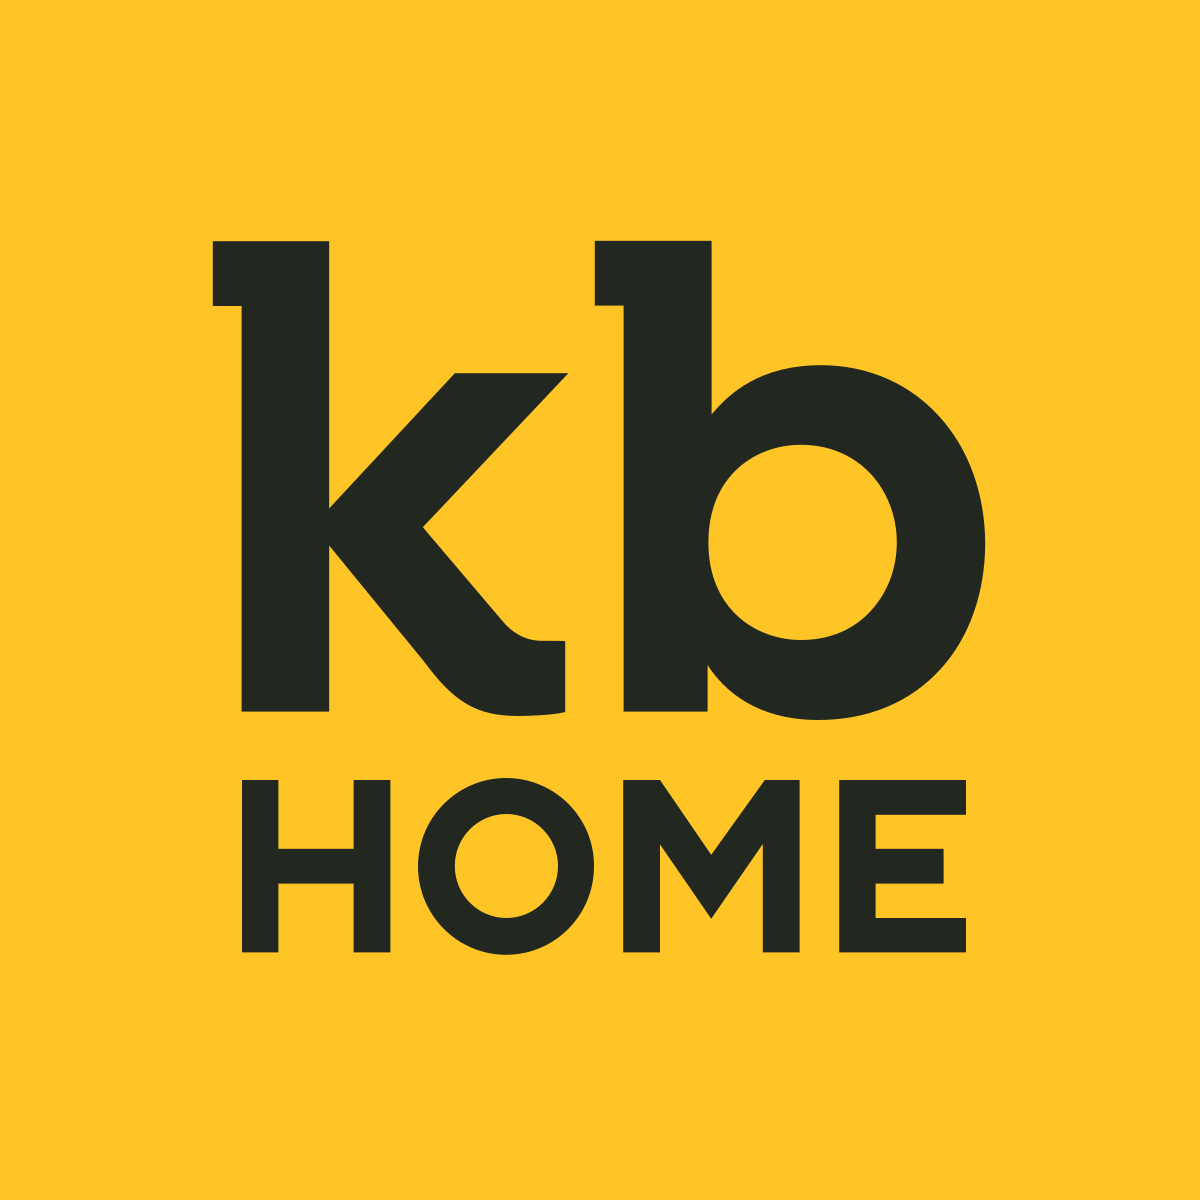 Kb home logo on a yellow background highlights strategic branding services.